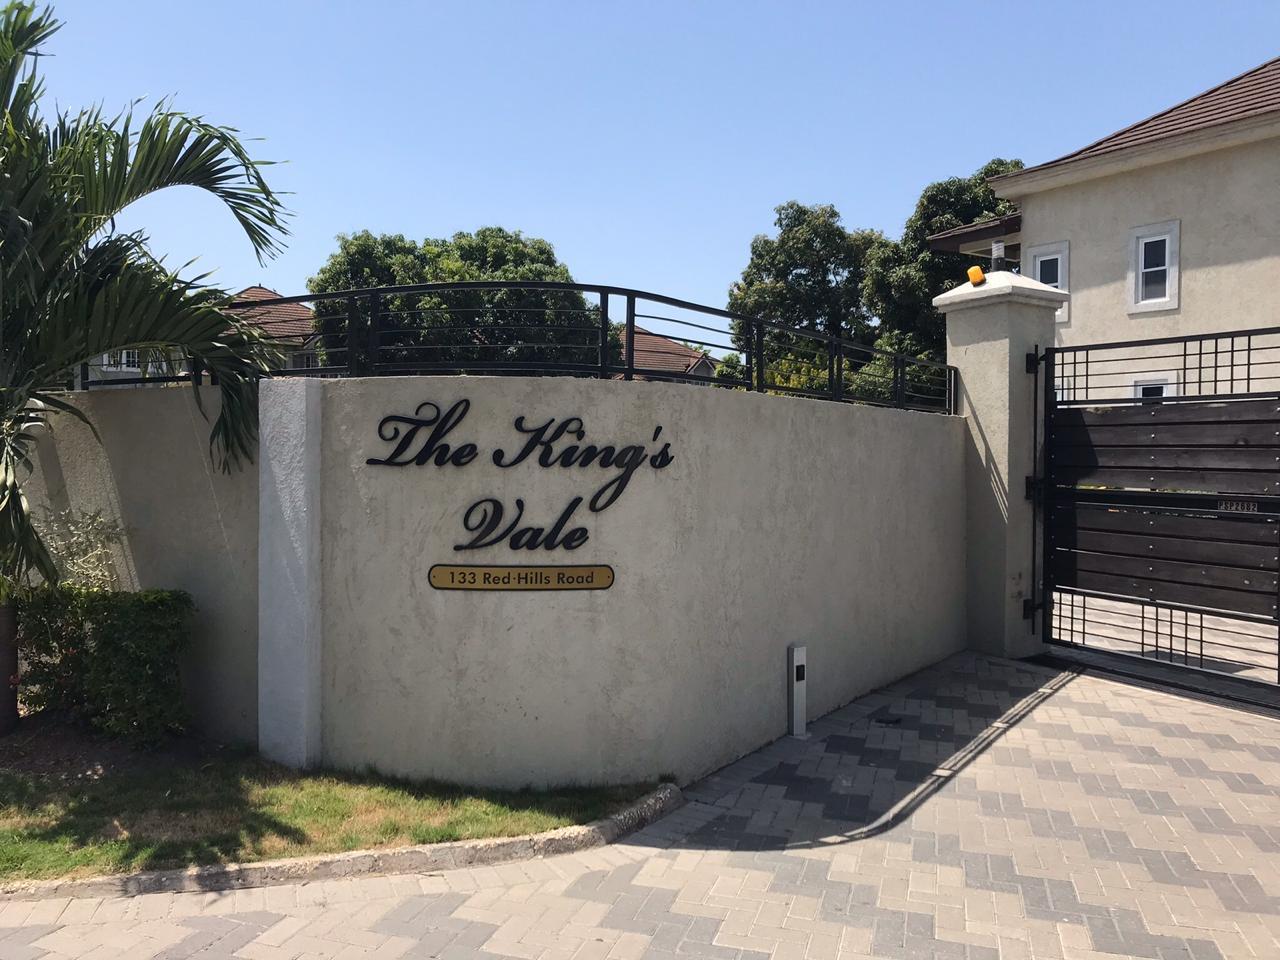 Apartment For Rent 133 Red Hills Road Kingston 19 800 Keez